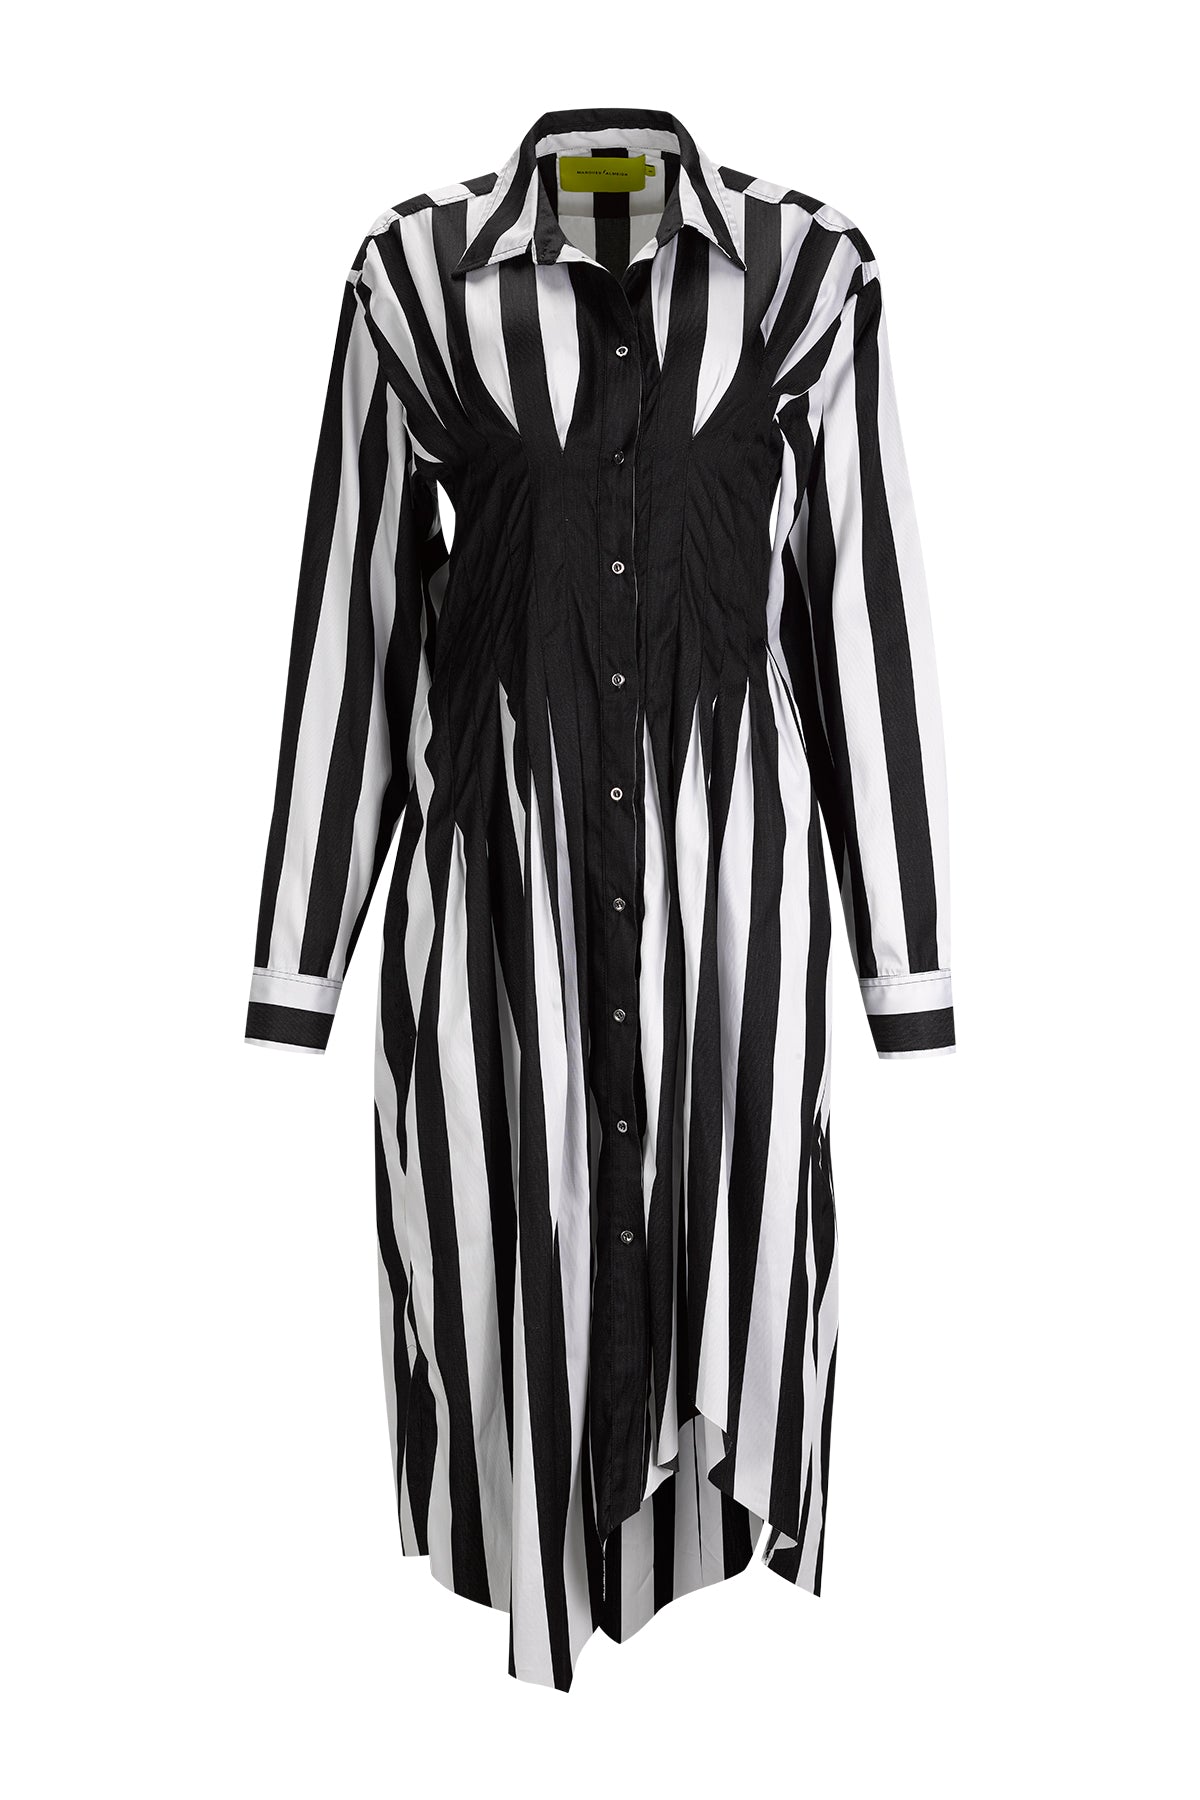 BLACK AND WHITE CINCHED SHIRT DRESS marques almeida